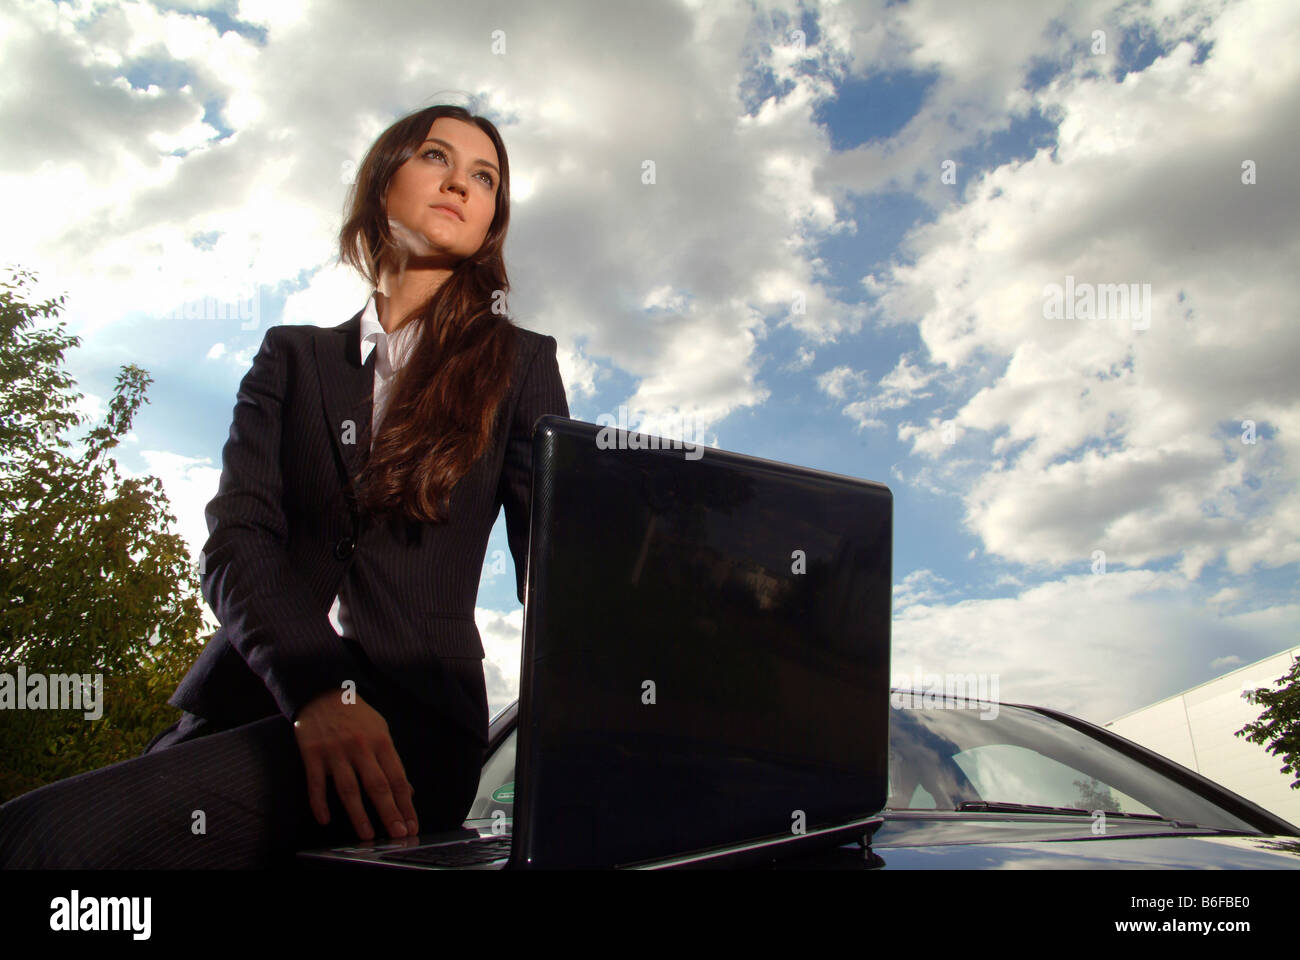 Young businesswoman in her car with a laptop in front of a cloudy sky Stock Photo